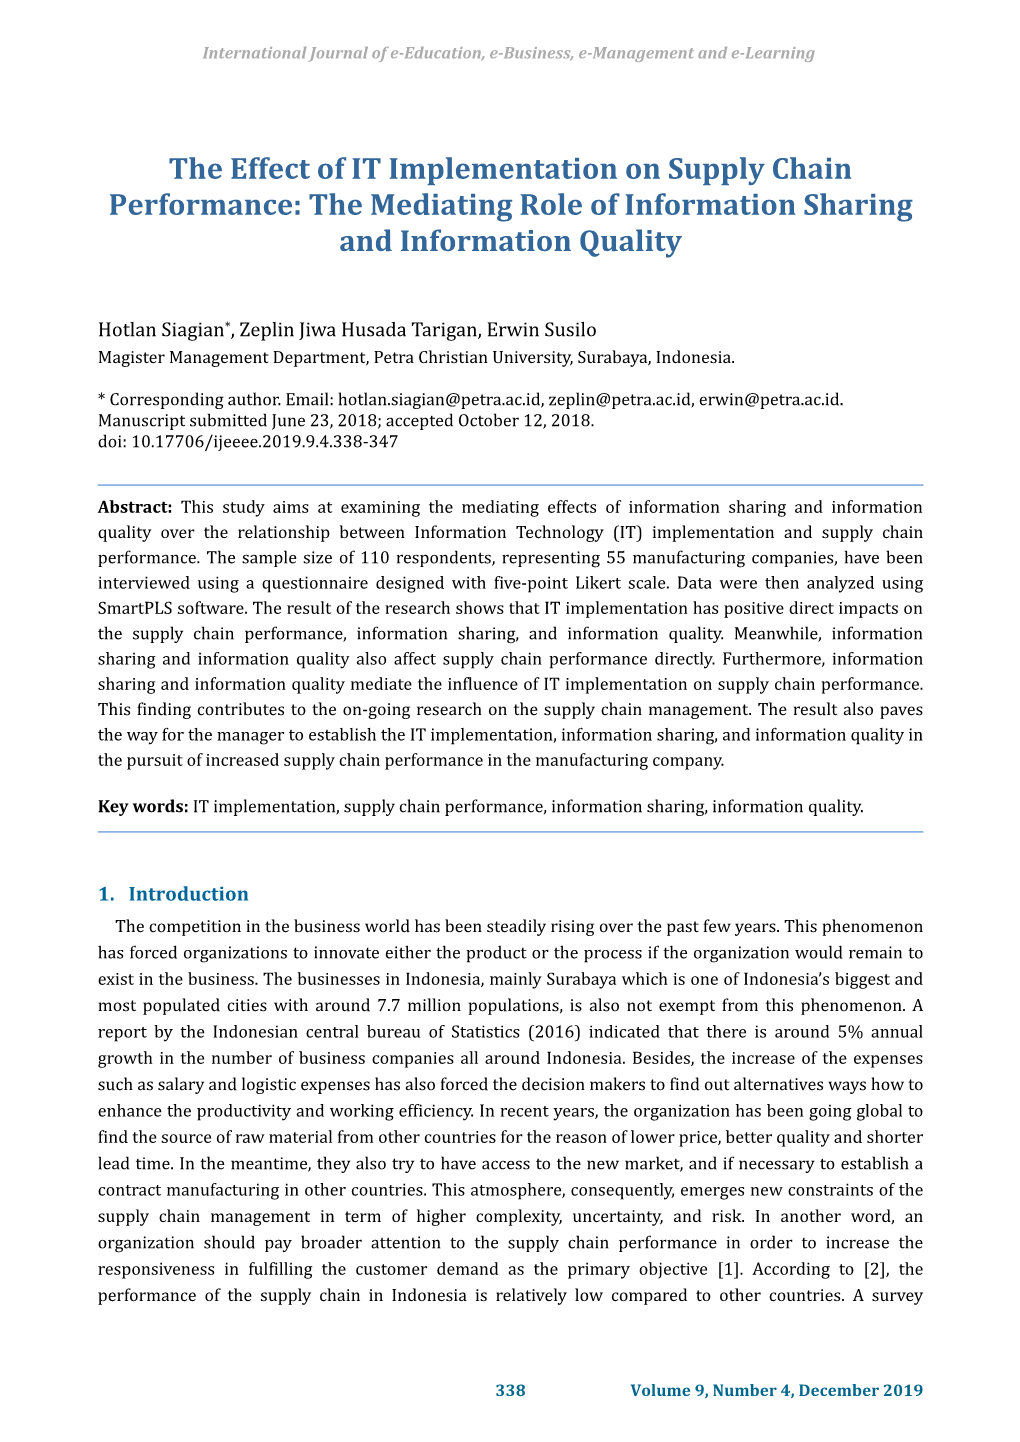 The Effect of IT Implementation on Supply Chain Performance: the Mediating Role of Information Sharing and Information Quality